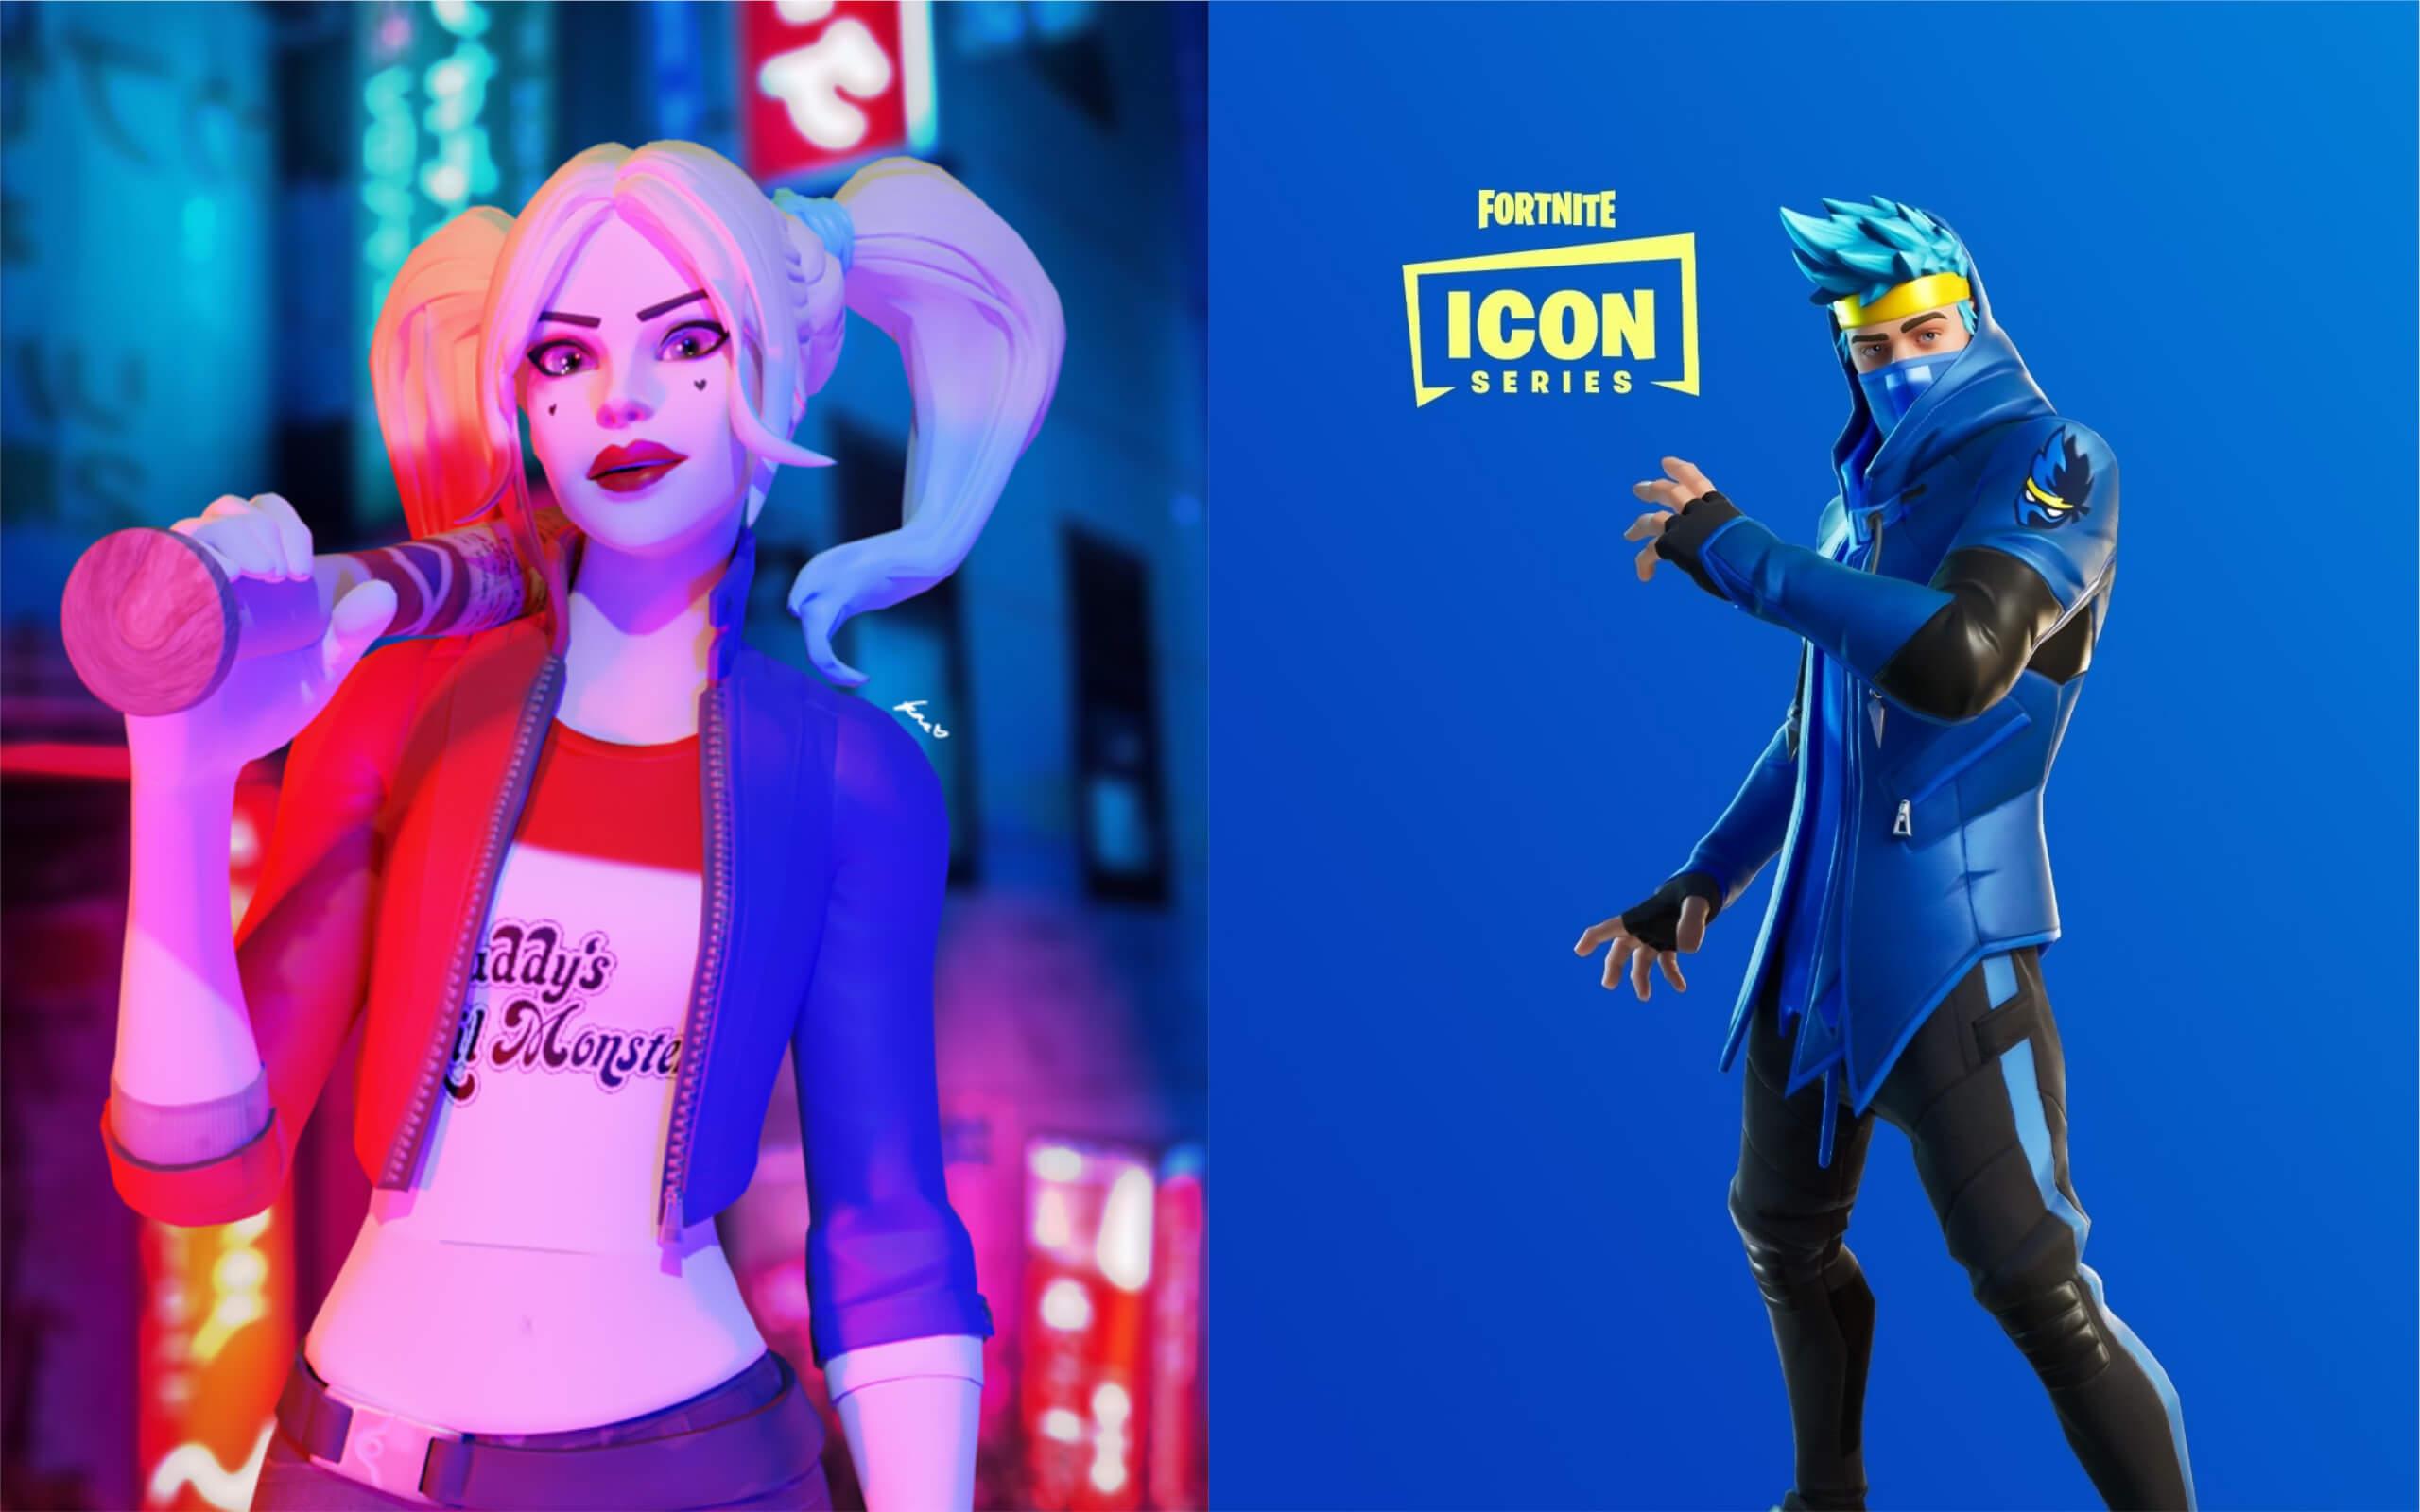 Awesome Fortnite skin concepts